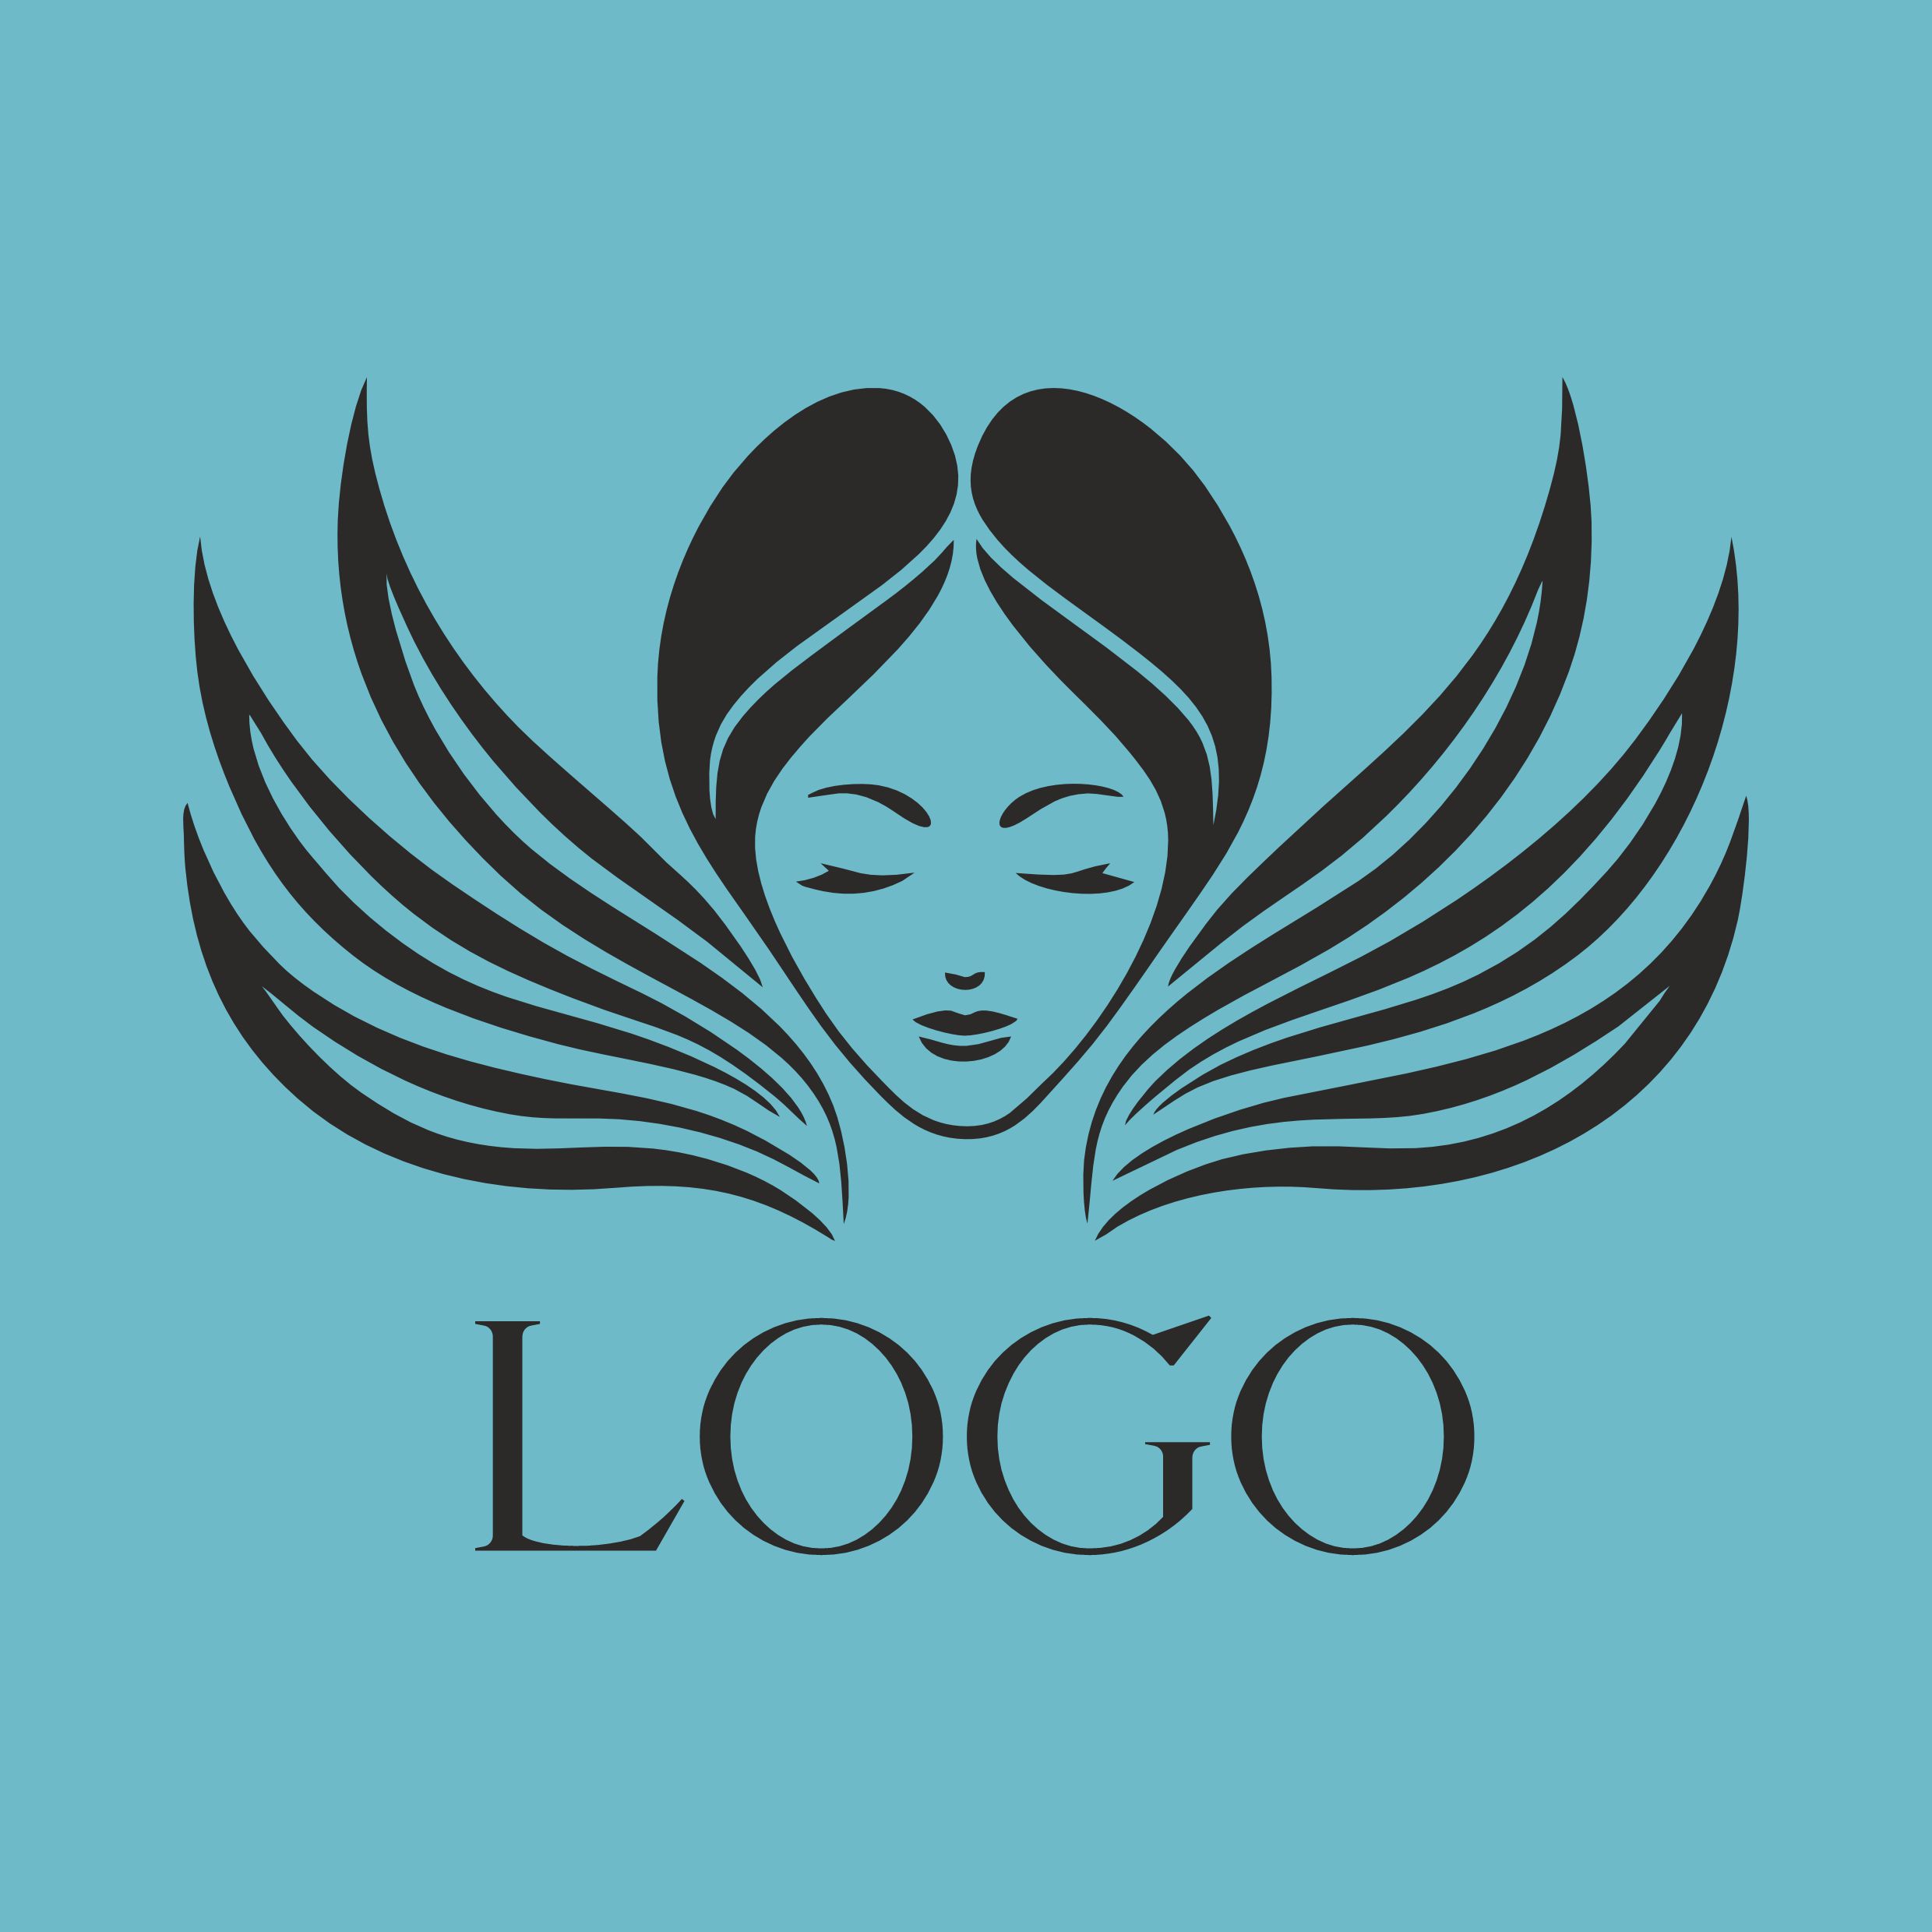 The logo with the image of a female face and wings preview image.